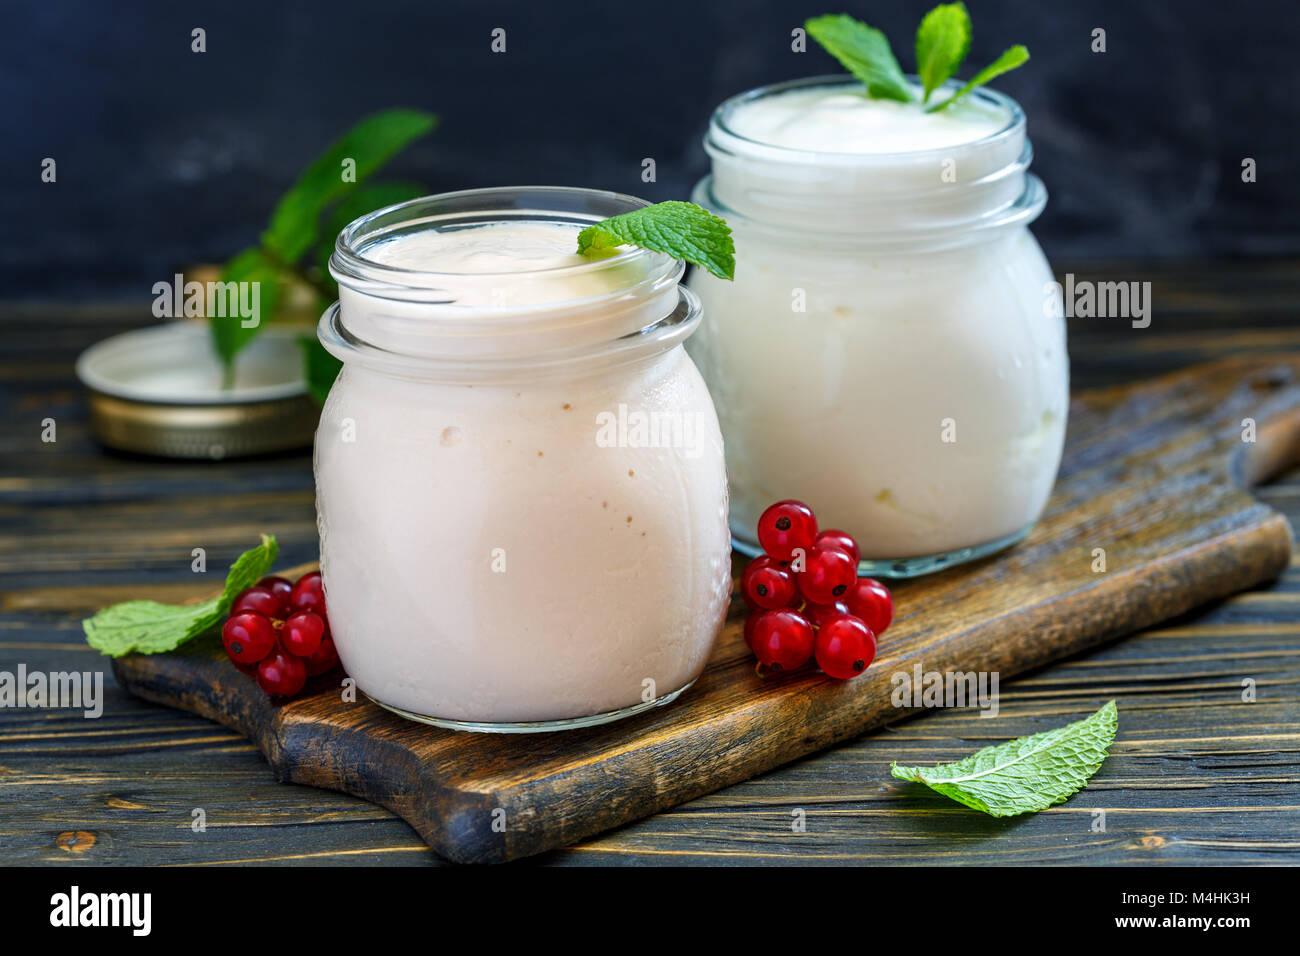 Jars with melted sour milk and natural yoghurt. Stock Photo